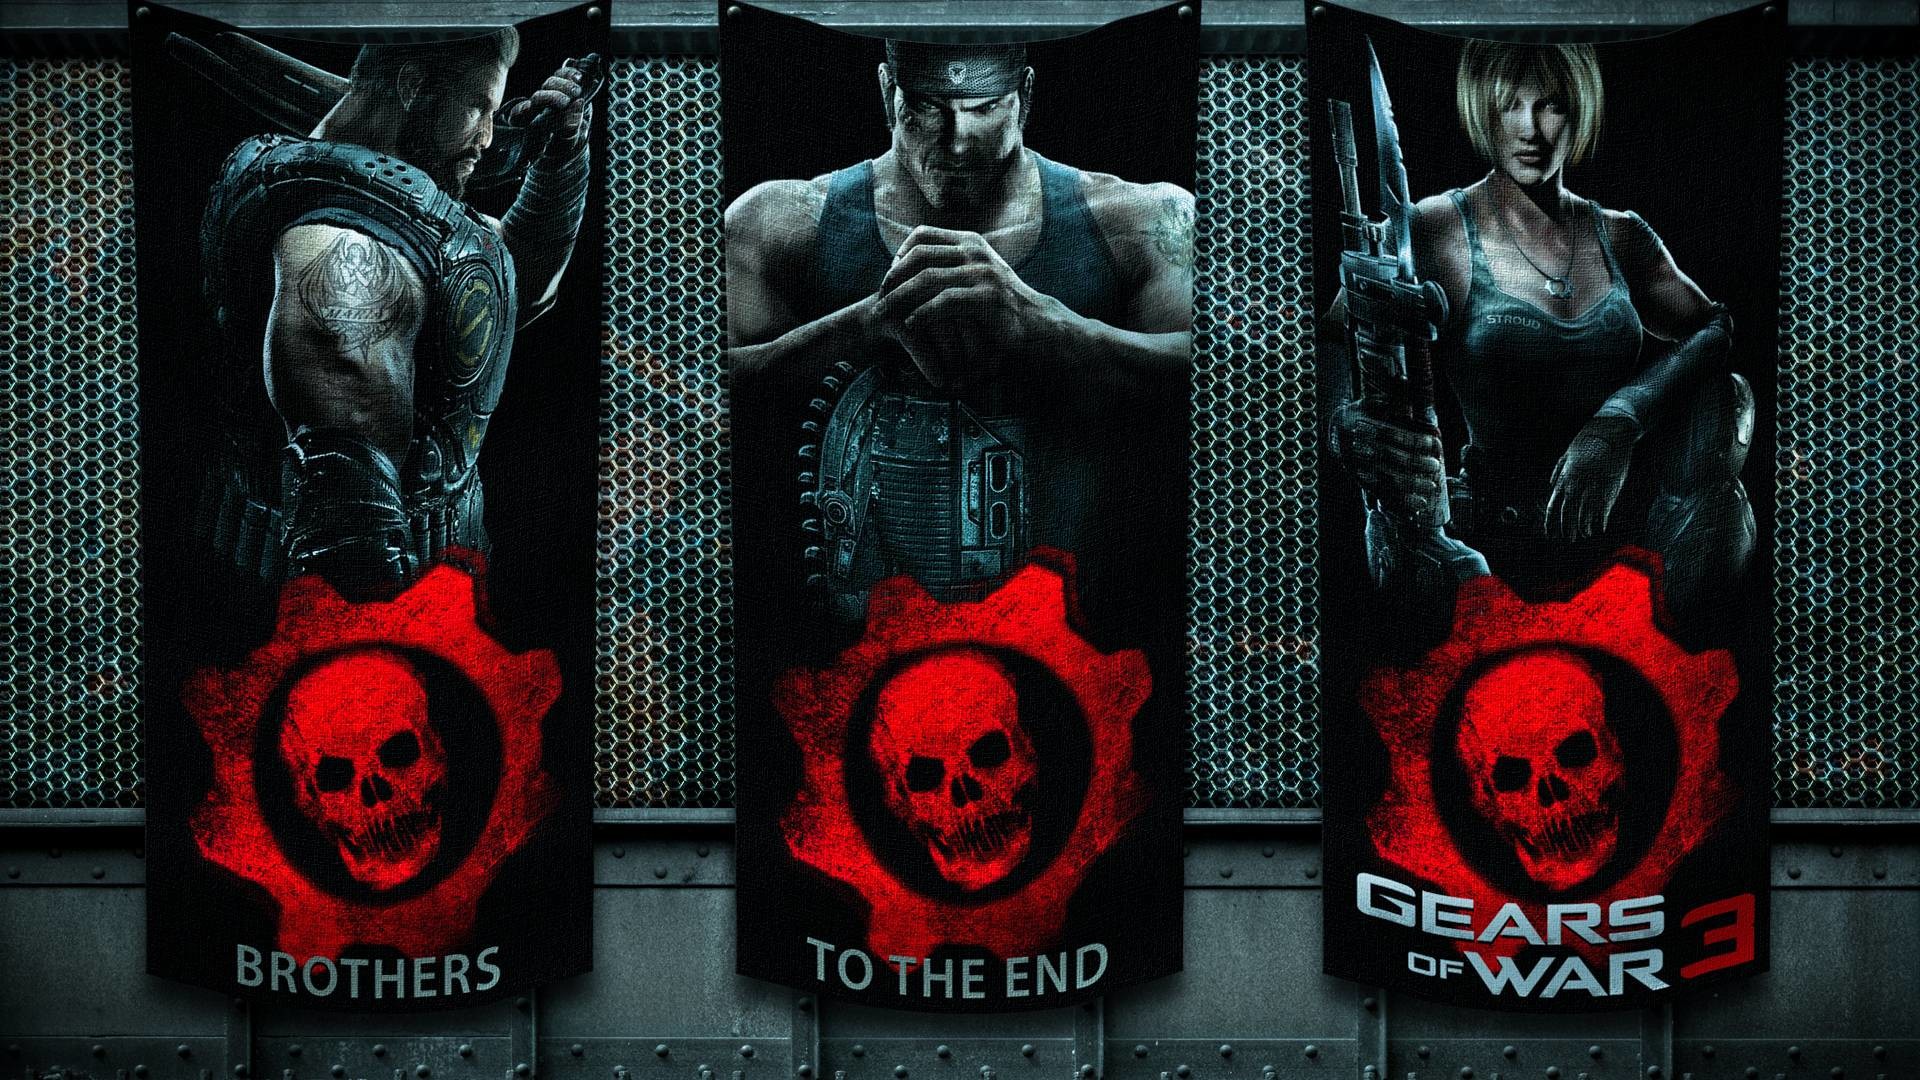 1920x1080 Gears Of War Images For Free Wallpaper